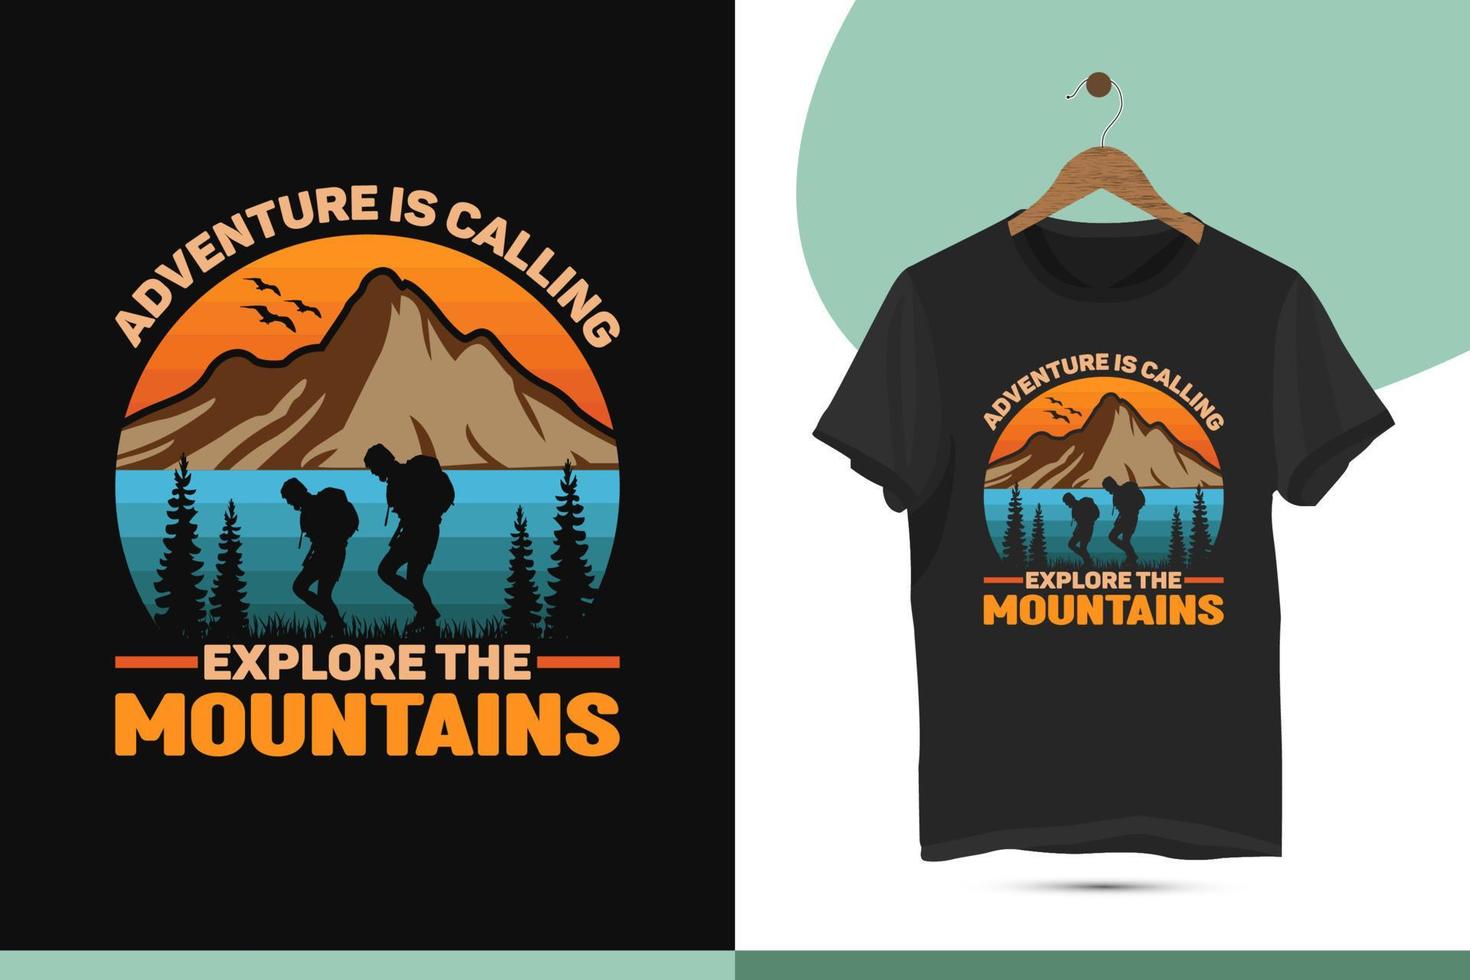 Adventure is calling explore the mountains - Vintage mountain hiking t-shirt design template. Vector illustration with the hill, hiking man, and tree.